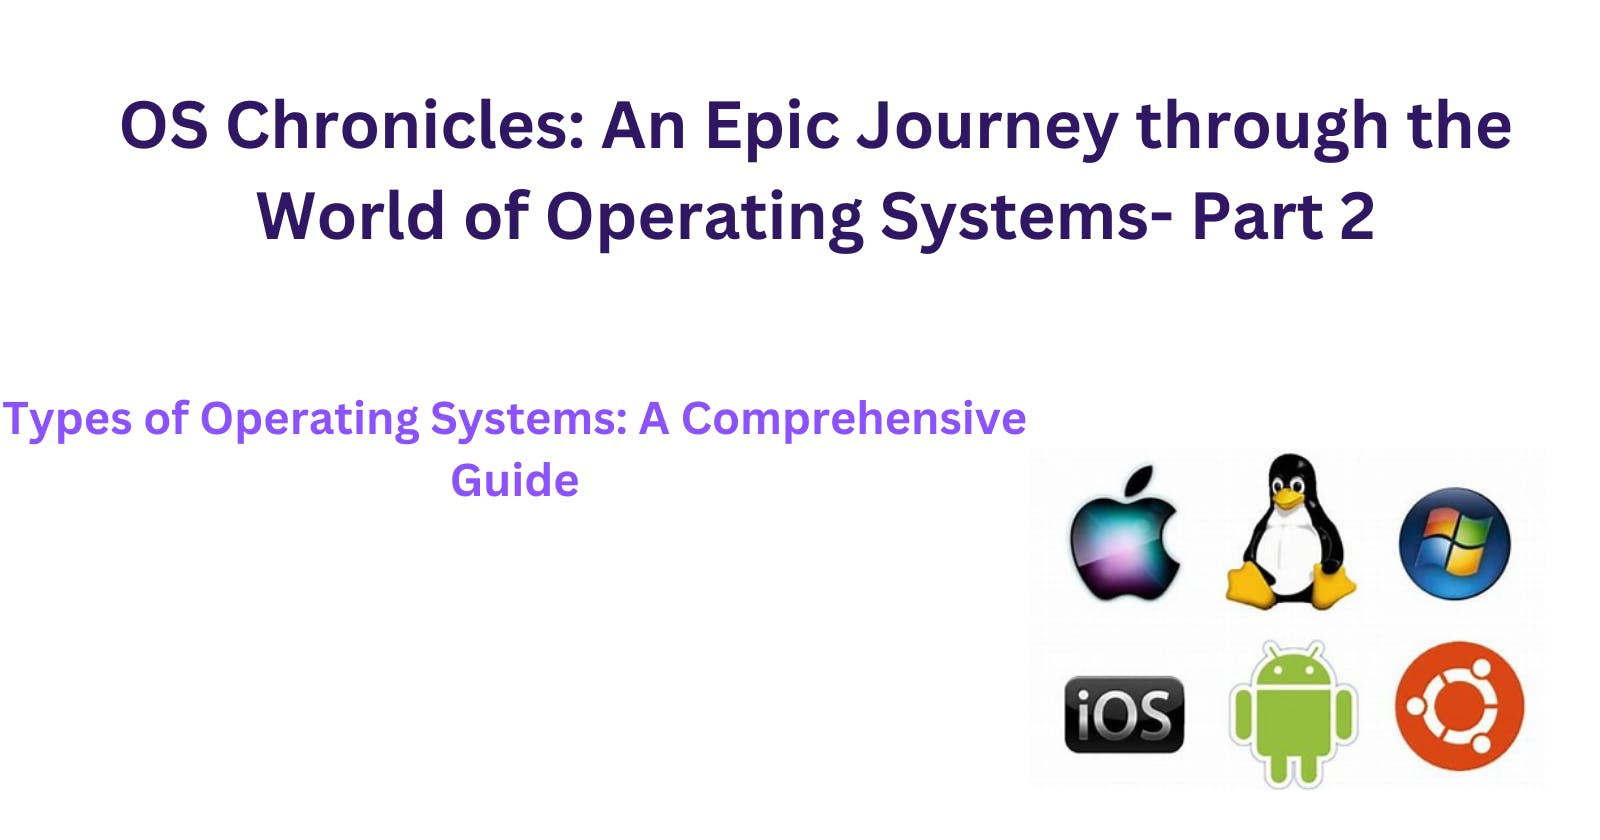 Types of Operating Systems: A Comprehensive Guide